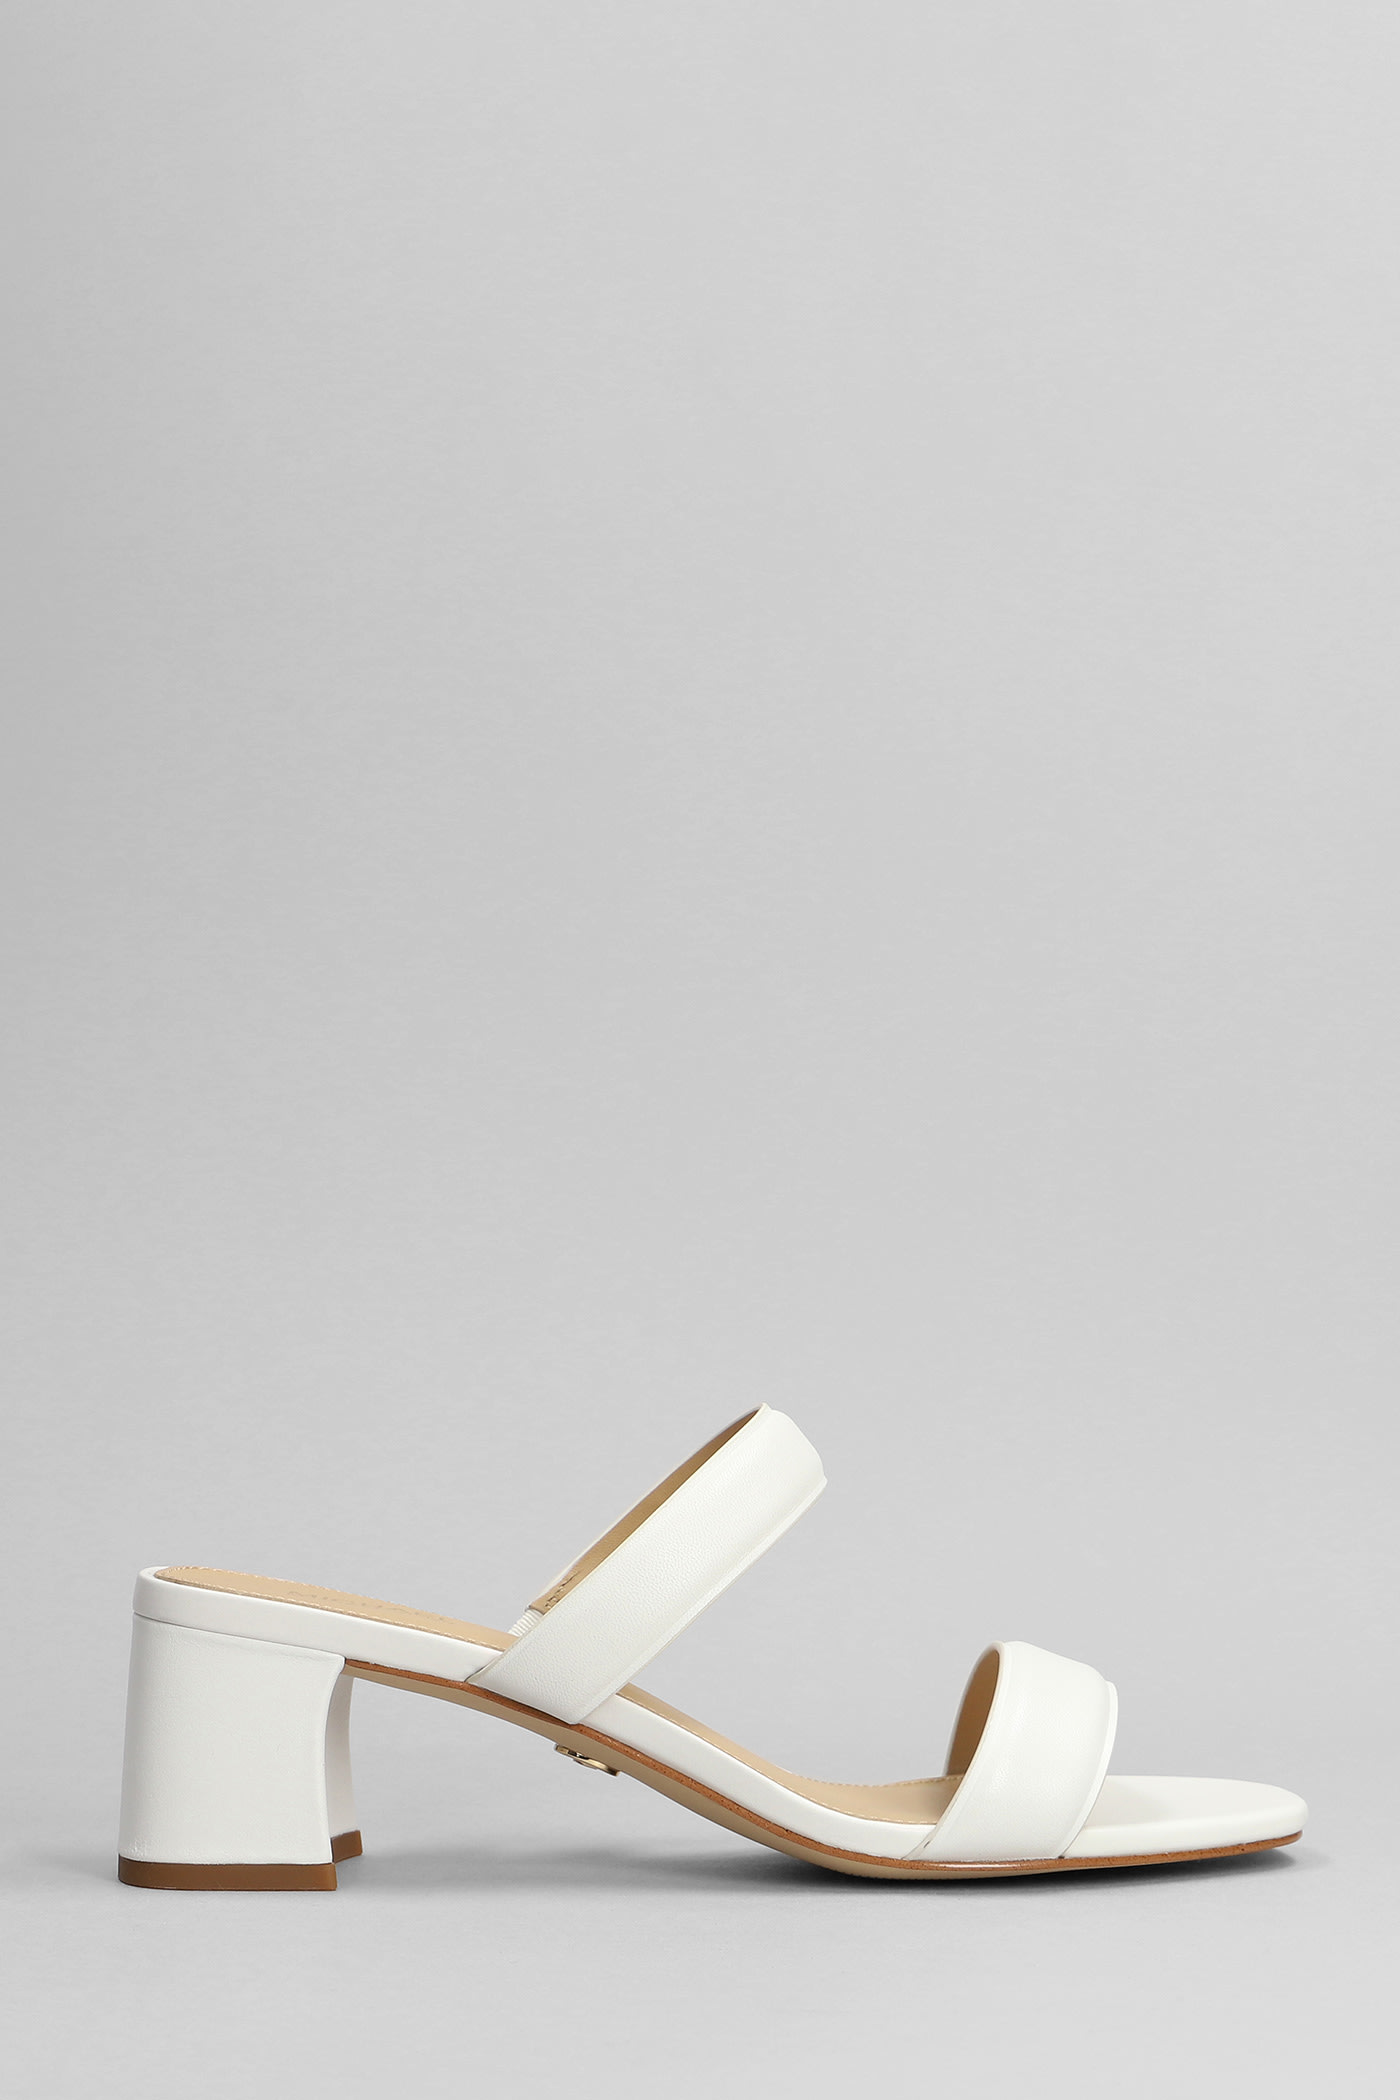 MICHAEL KORS JULES MID SANDALS IN WHITE LEATHER